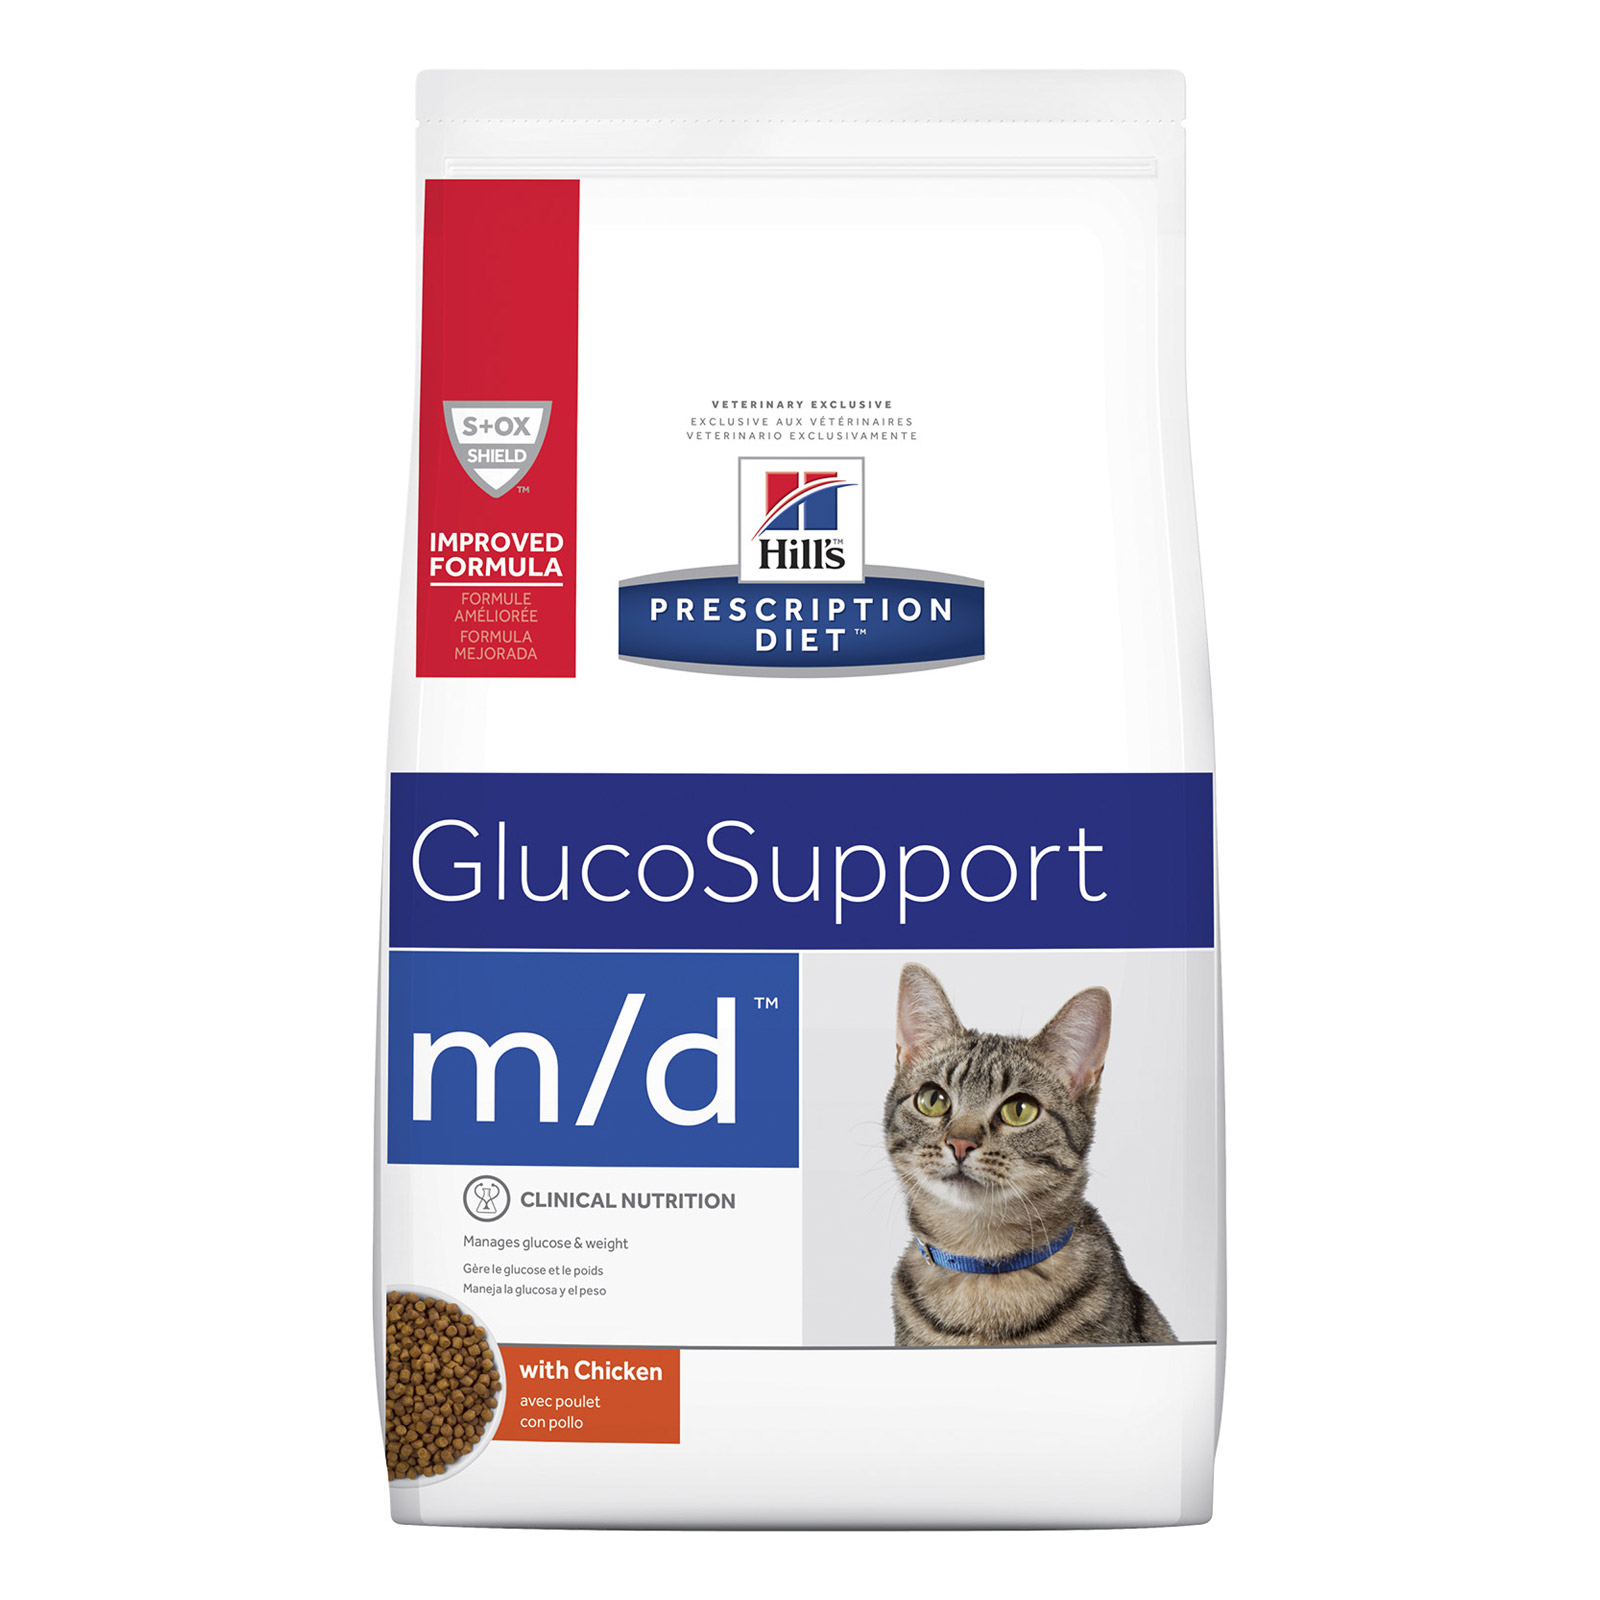 Hill's Prescription Diet m/d Feline Glucose/Weight Management with Chicken Dry for Food